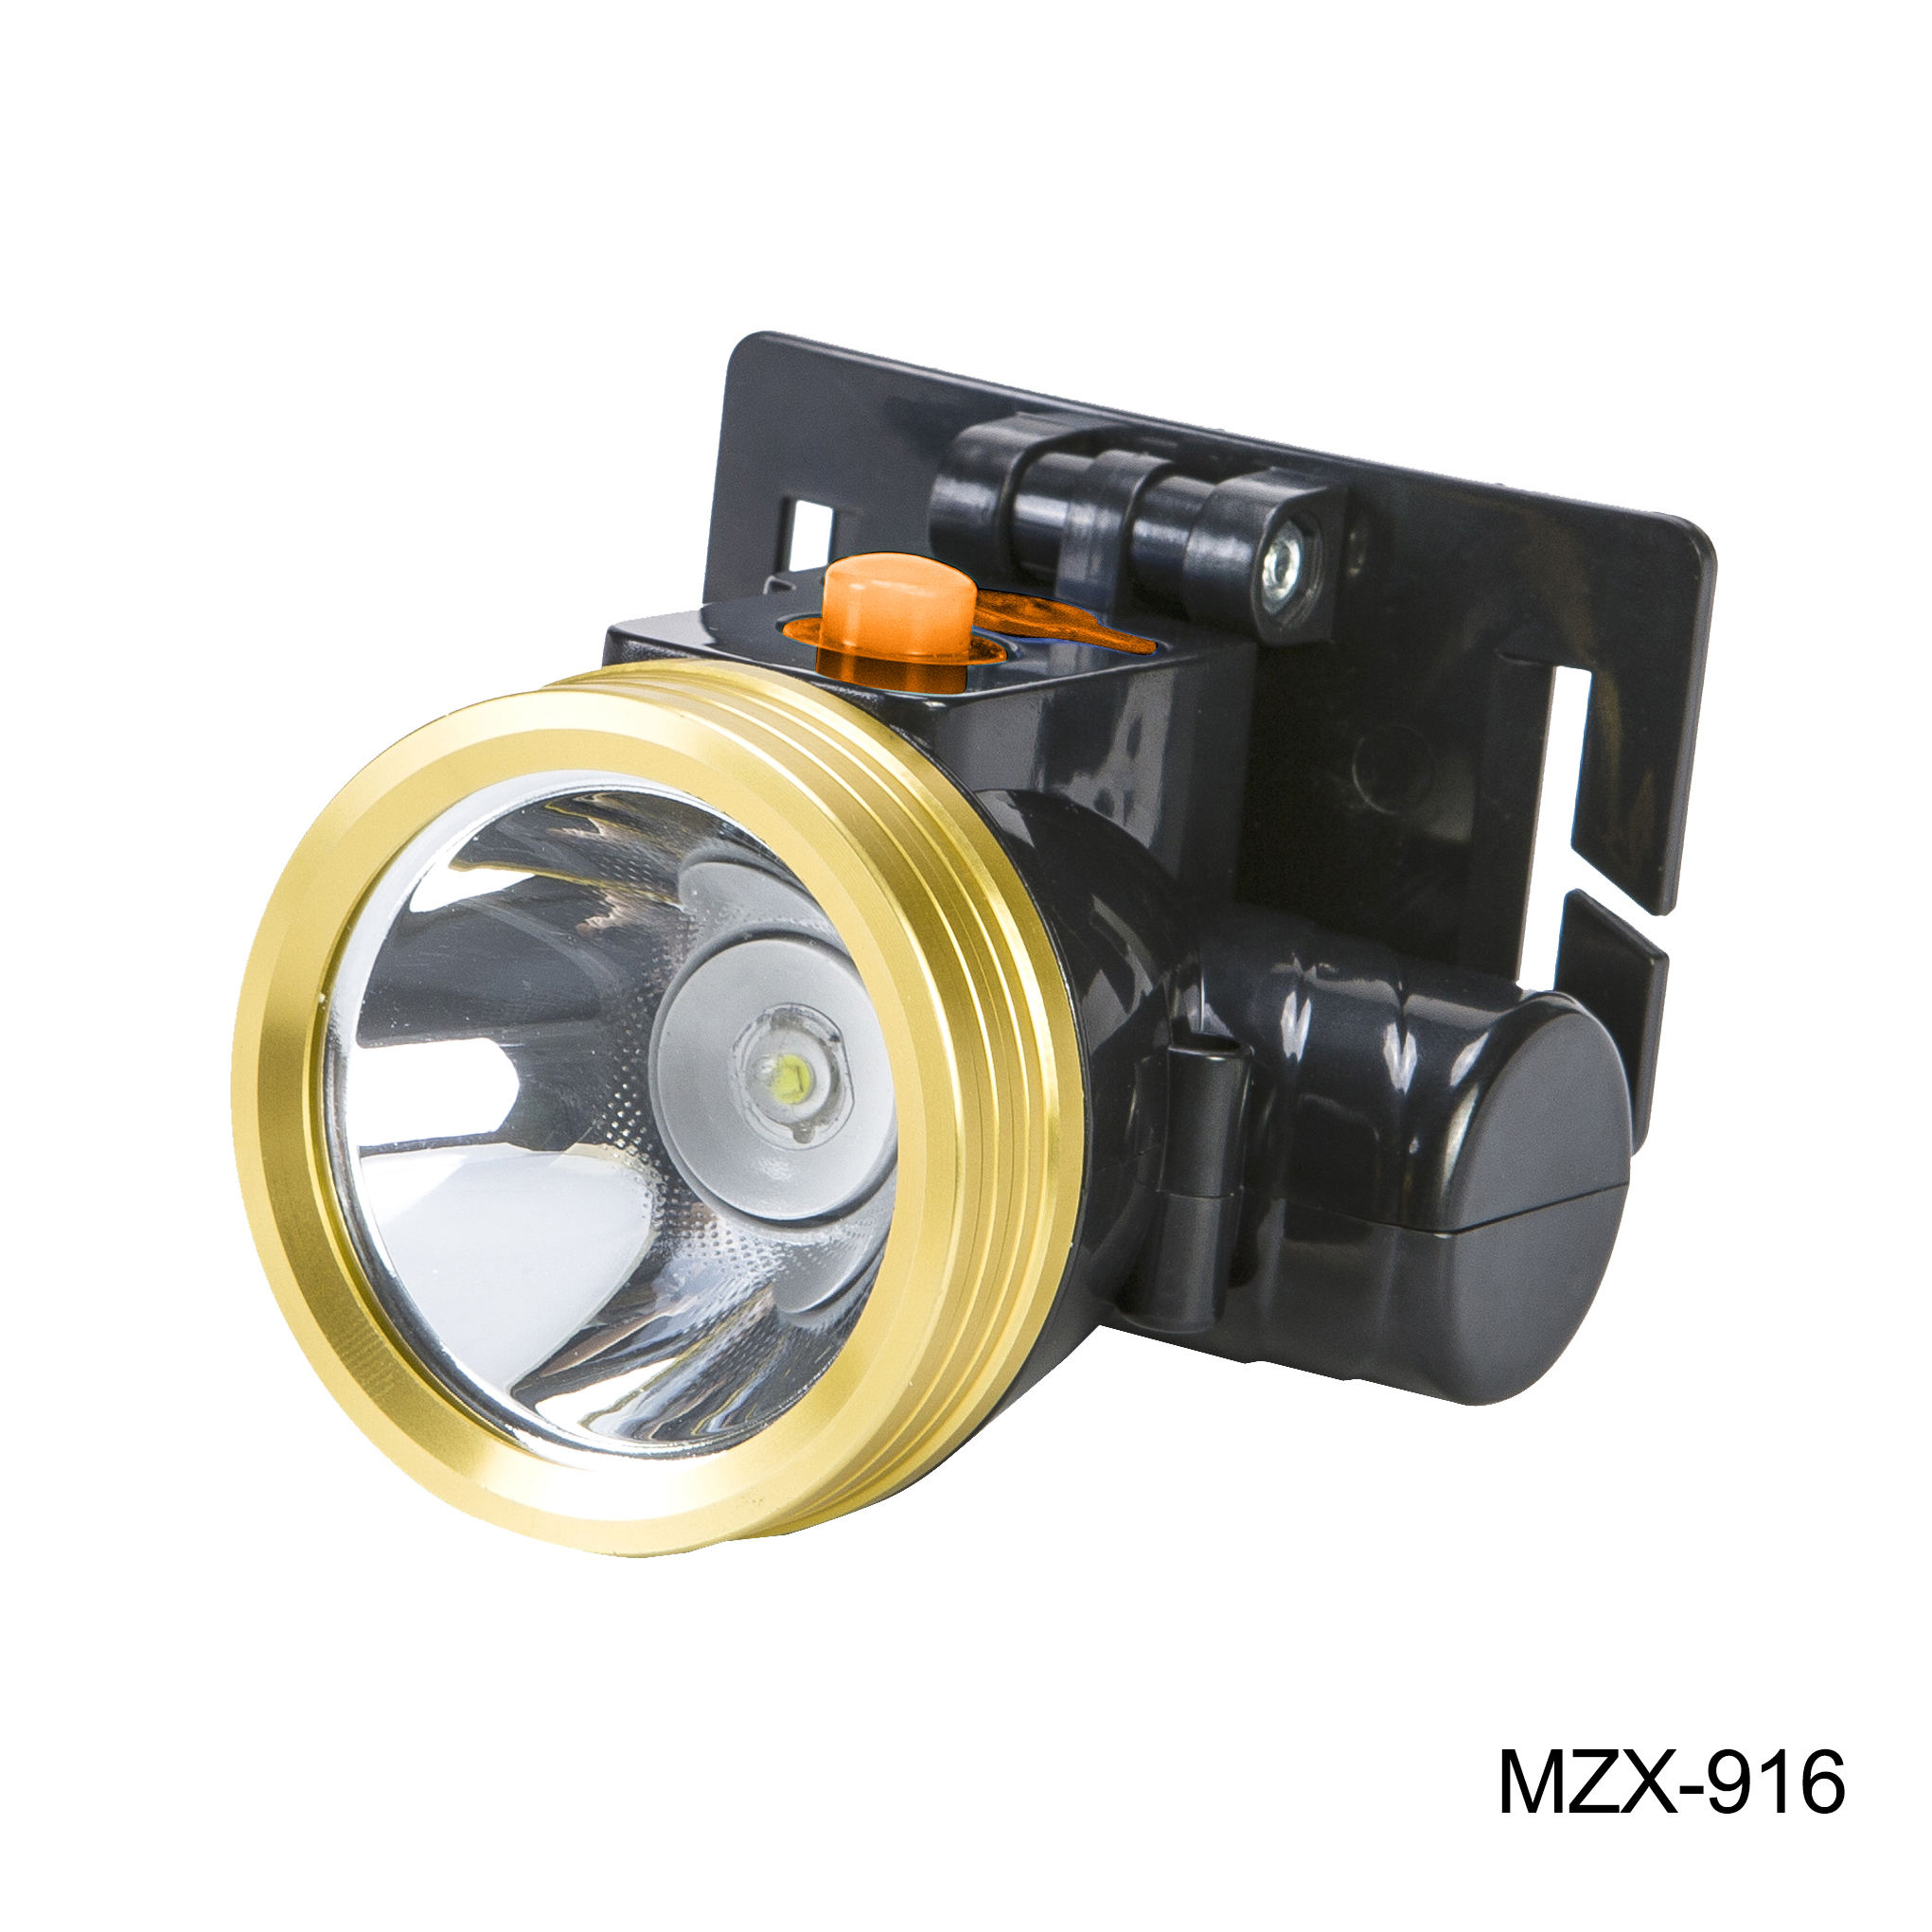 Necessary for Lithium Electric Headlamp Camping and Fishing in OEM Plant